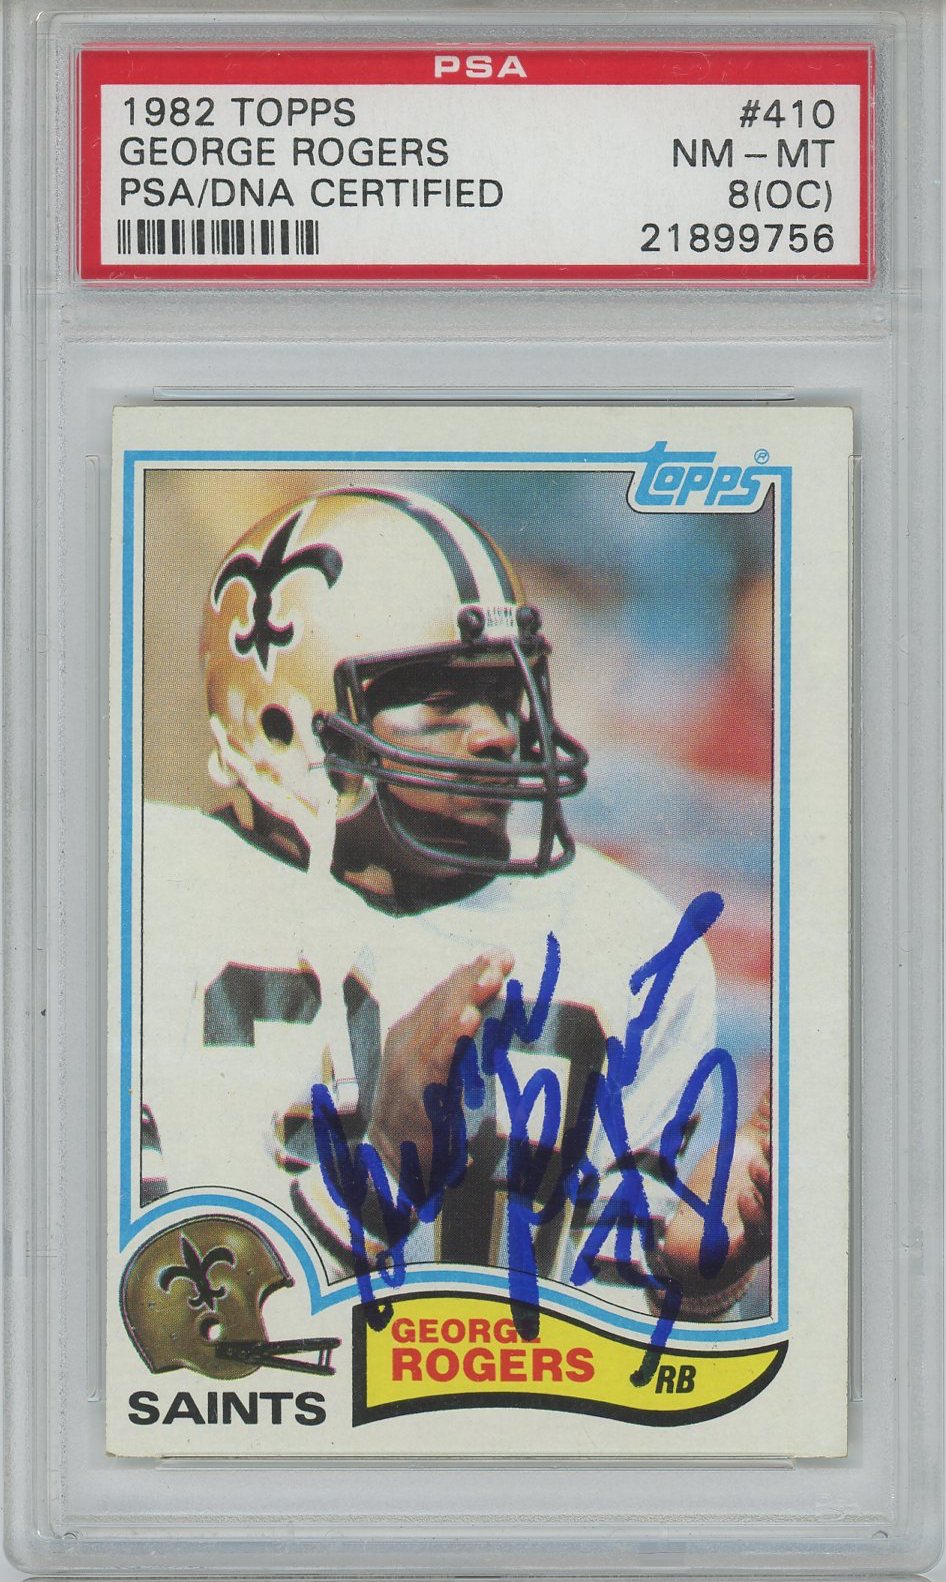 1982 TOPPS GEORGE ROGERS AUTO ROOKIE PSA/DNA